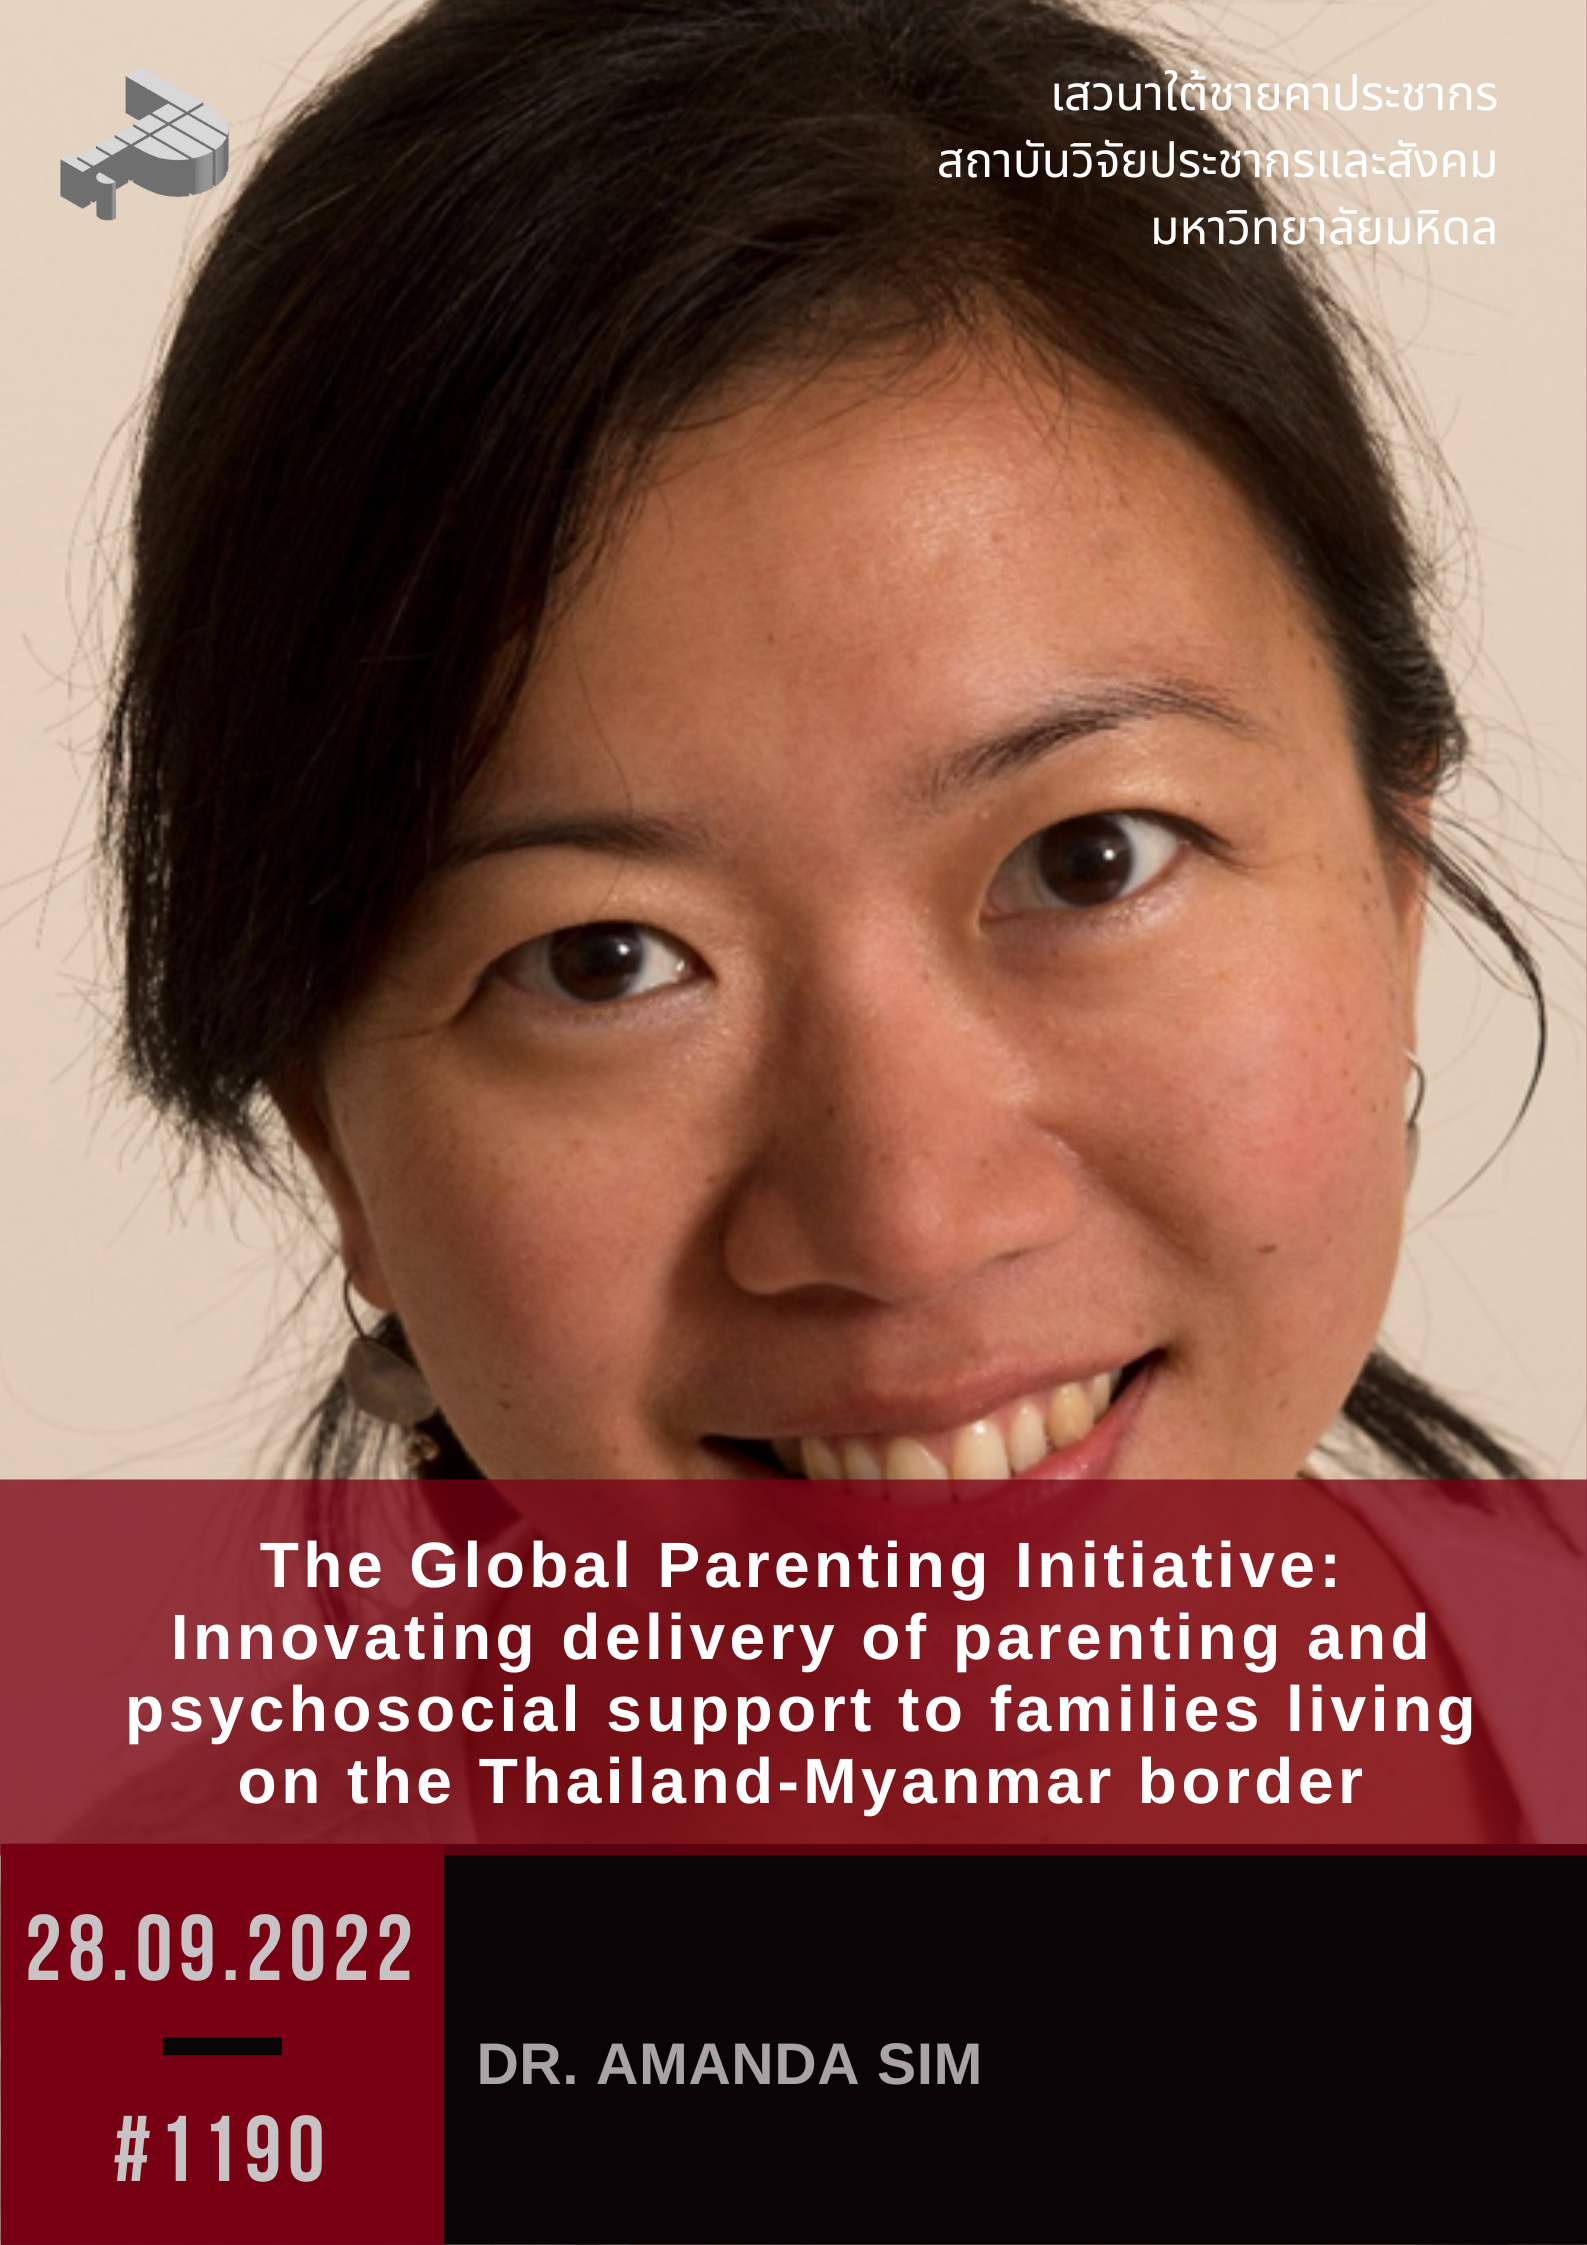 The Global Parenting Initiative: Innovating delivery of parenting and psychosocial support to families living on the Thailand-Myanmar border